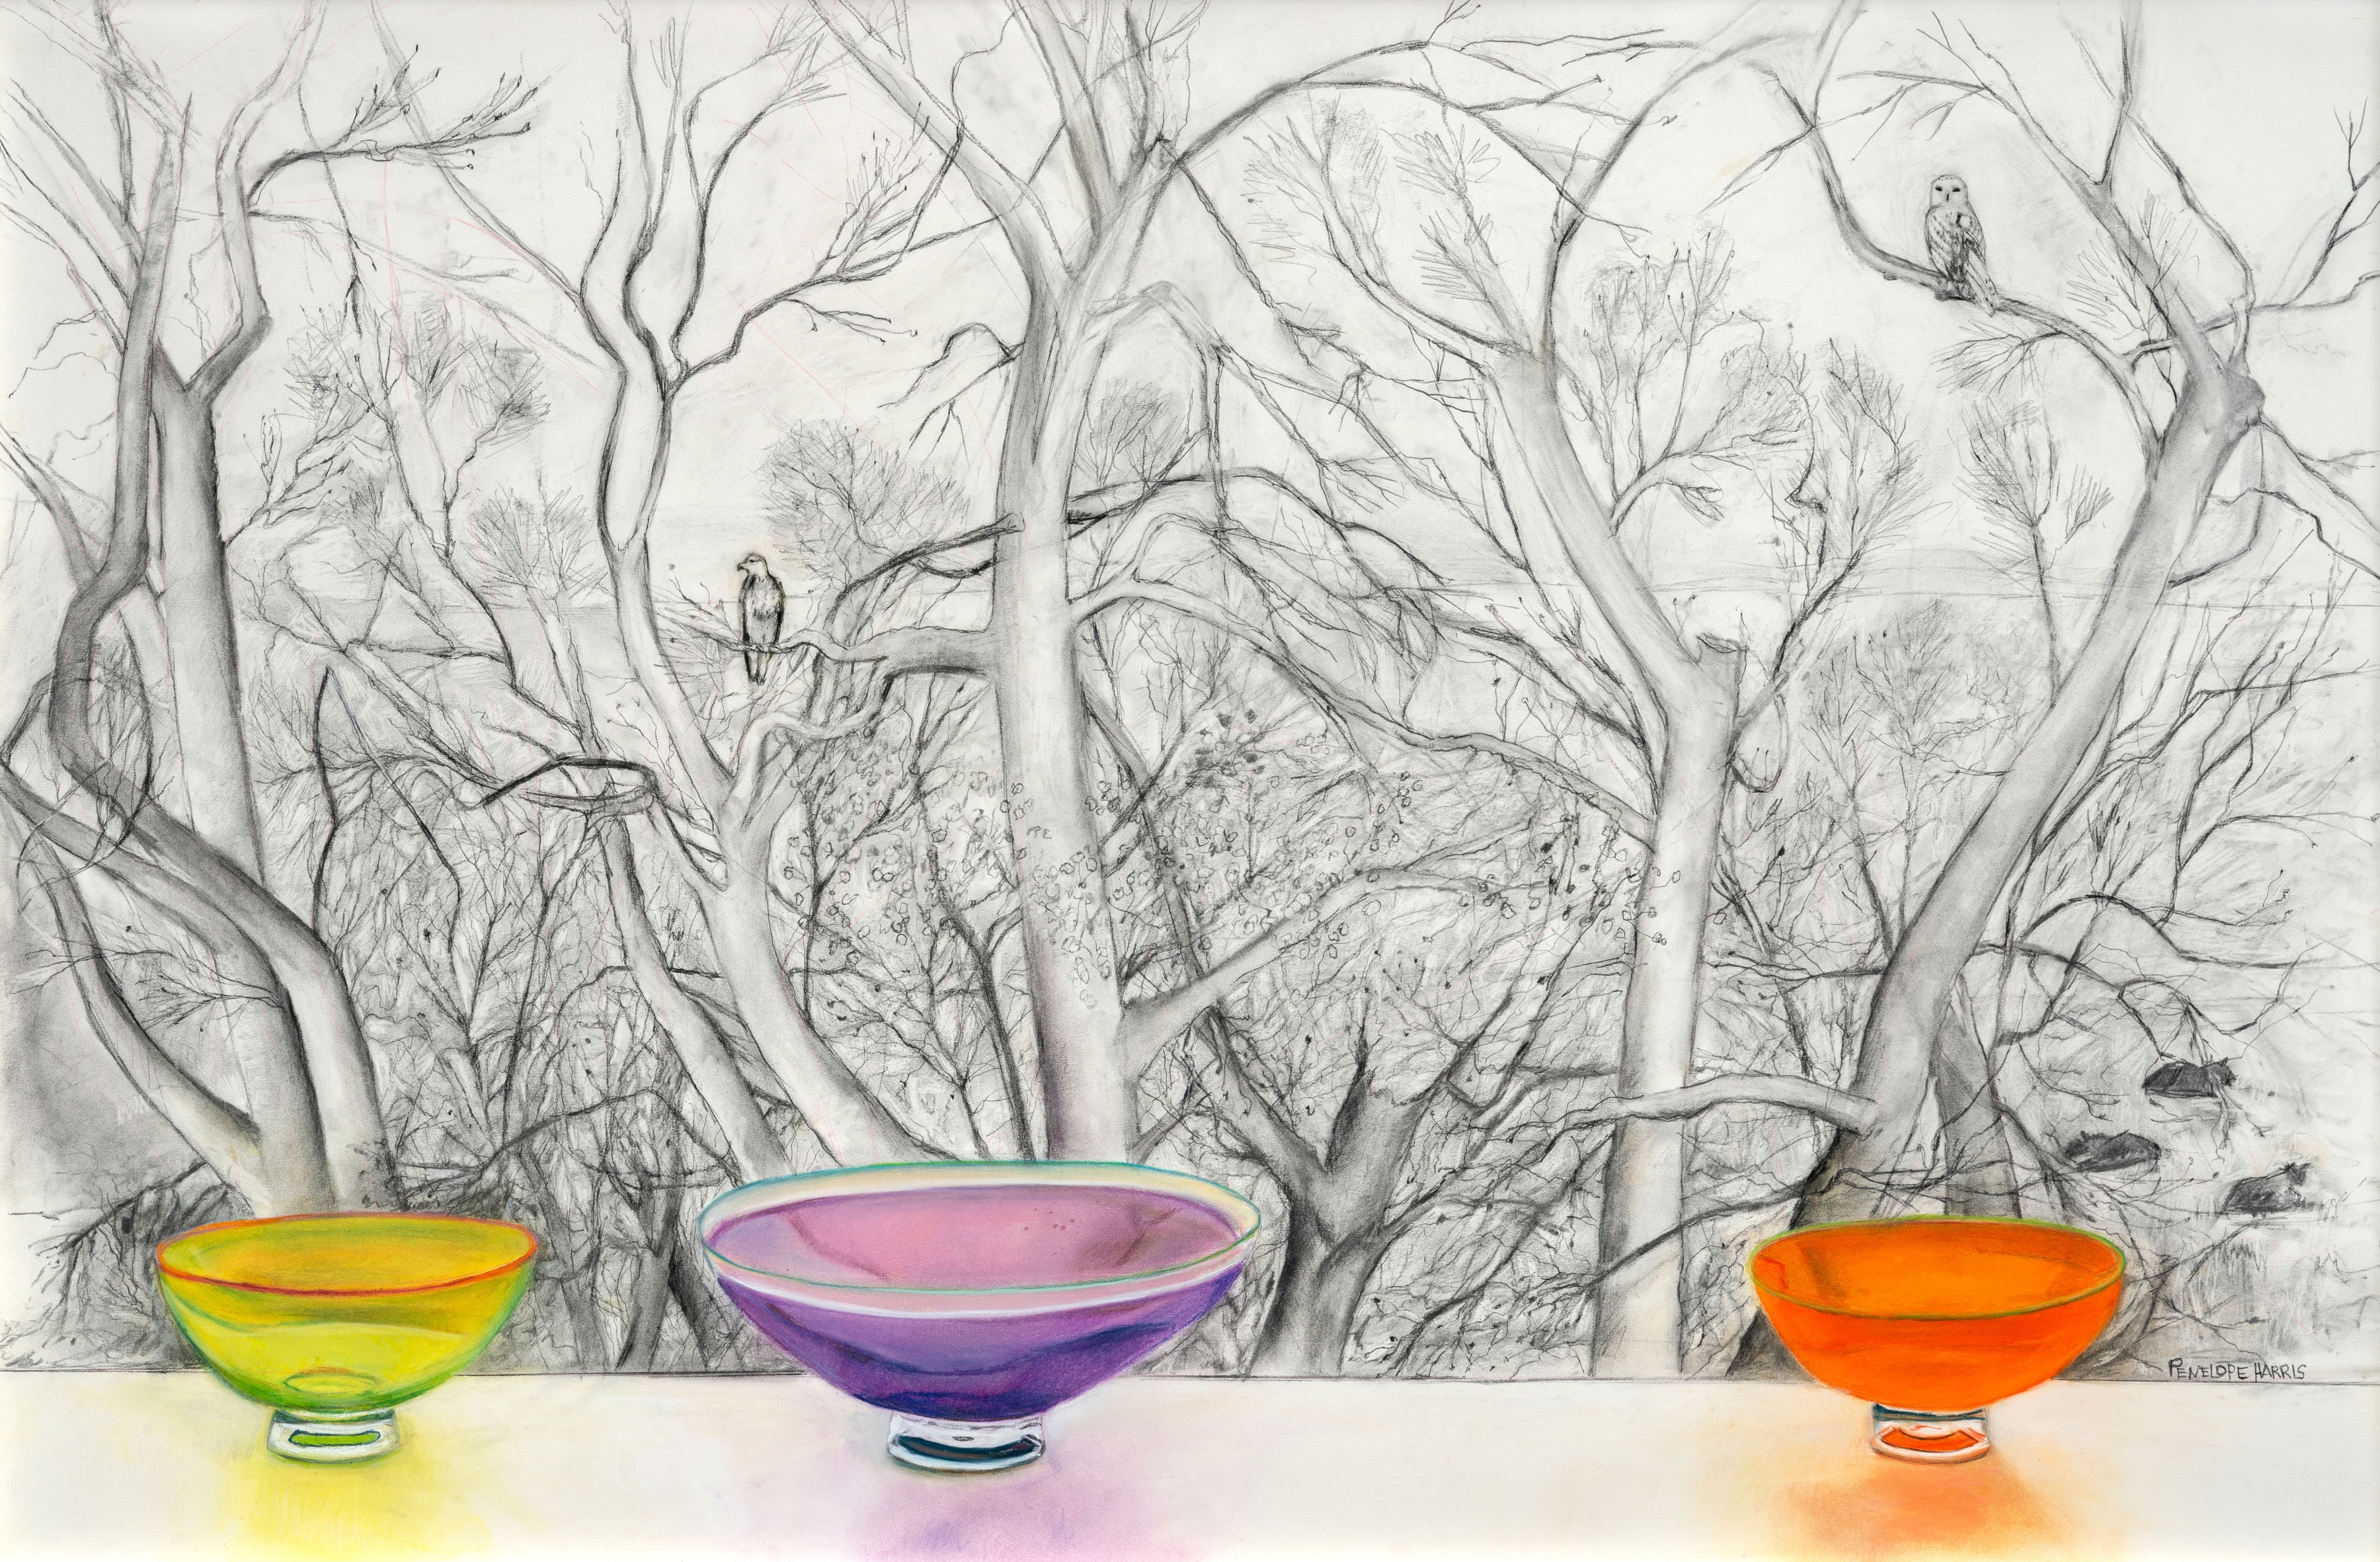 Study From The Studio Window, 40&amp;quot; x 60&amp;quot;, Charcoal And Pastel On Paper